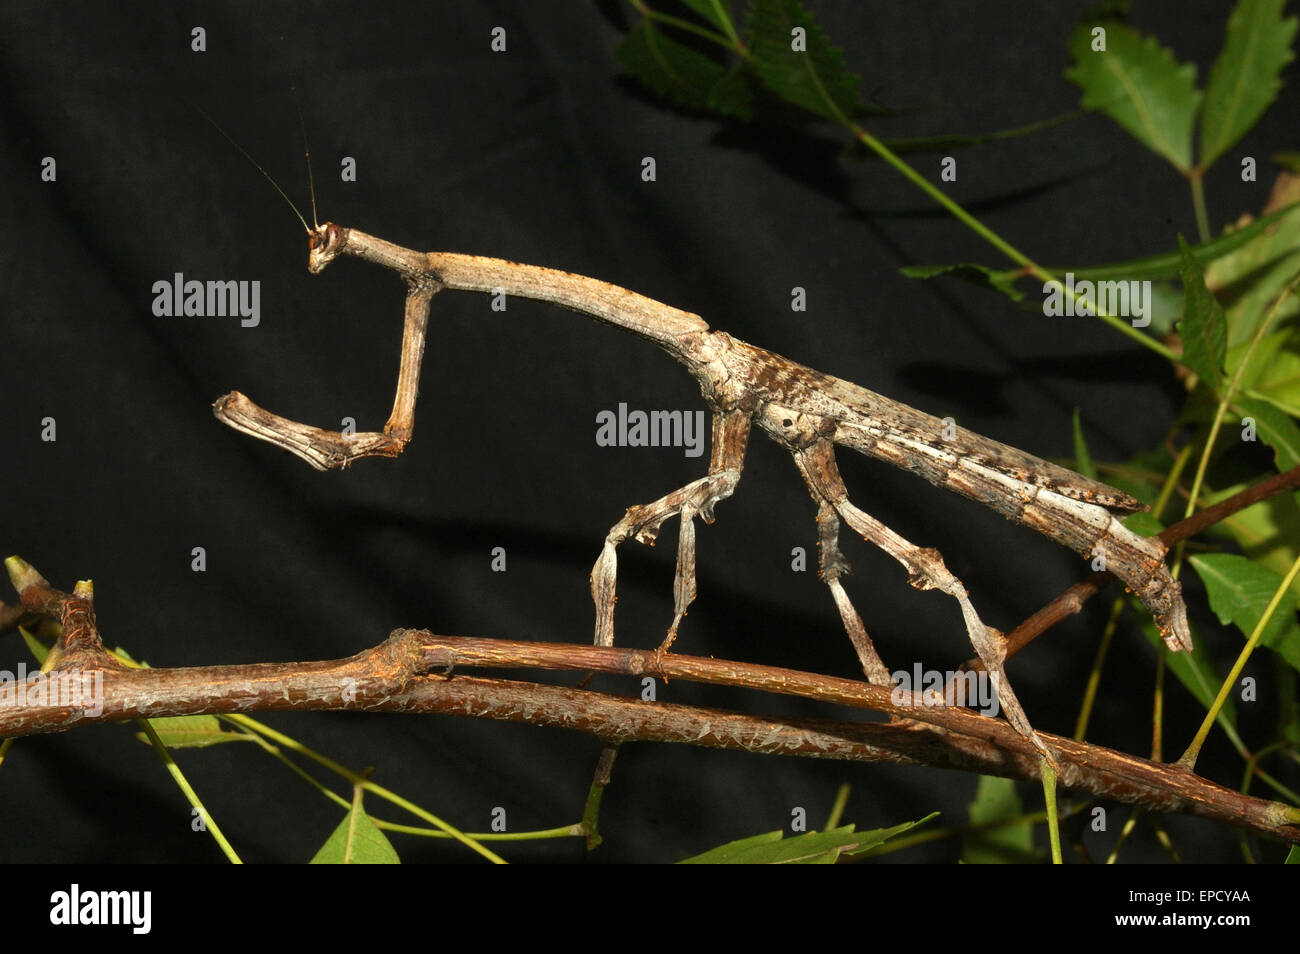 Brown stick insect from Tamil Nadu, South India Stock Photo